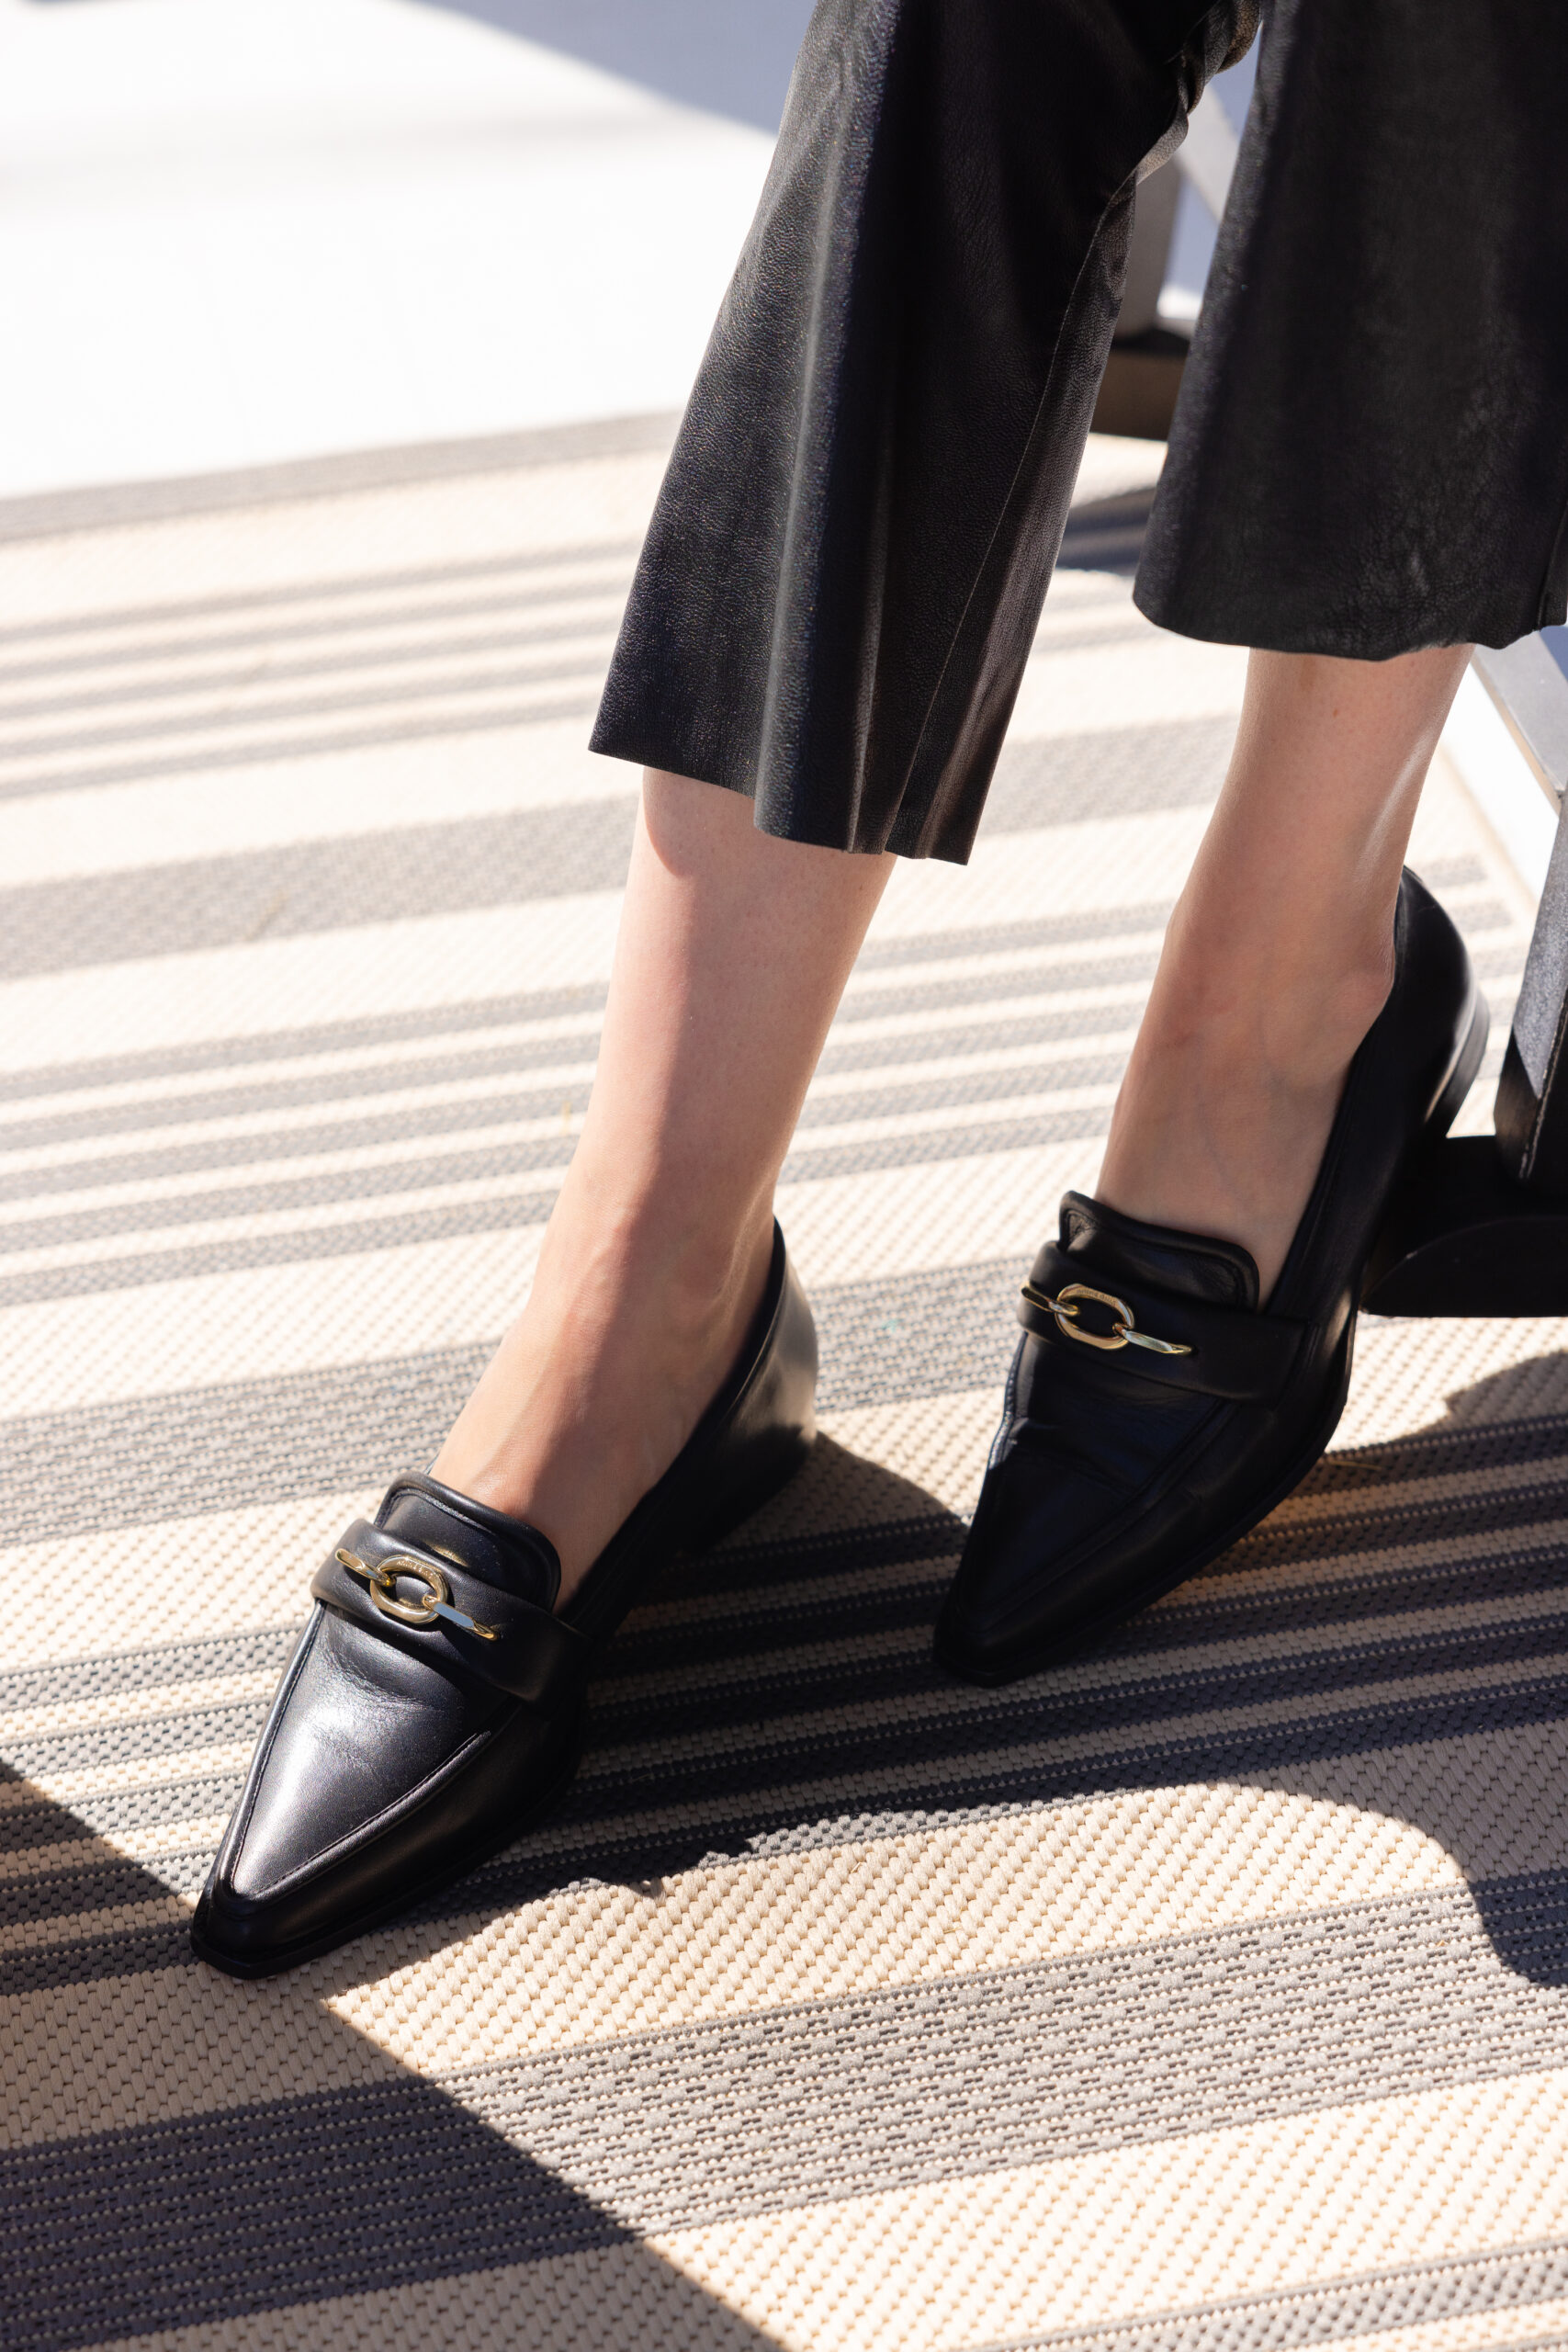 Are Loafers In Style for Fall 2022?